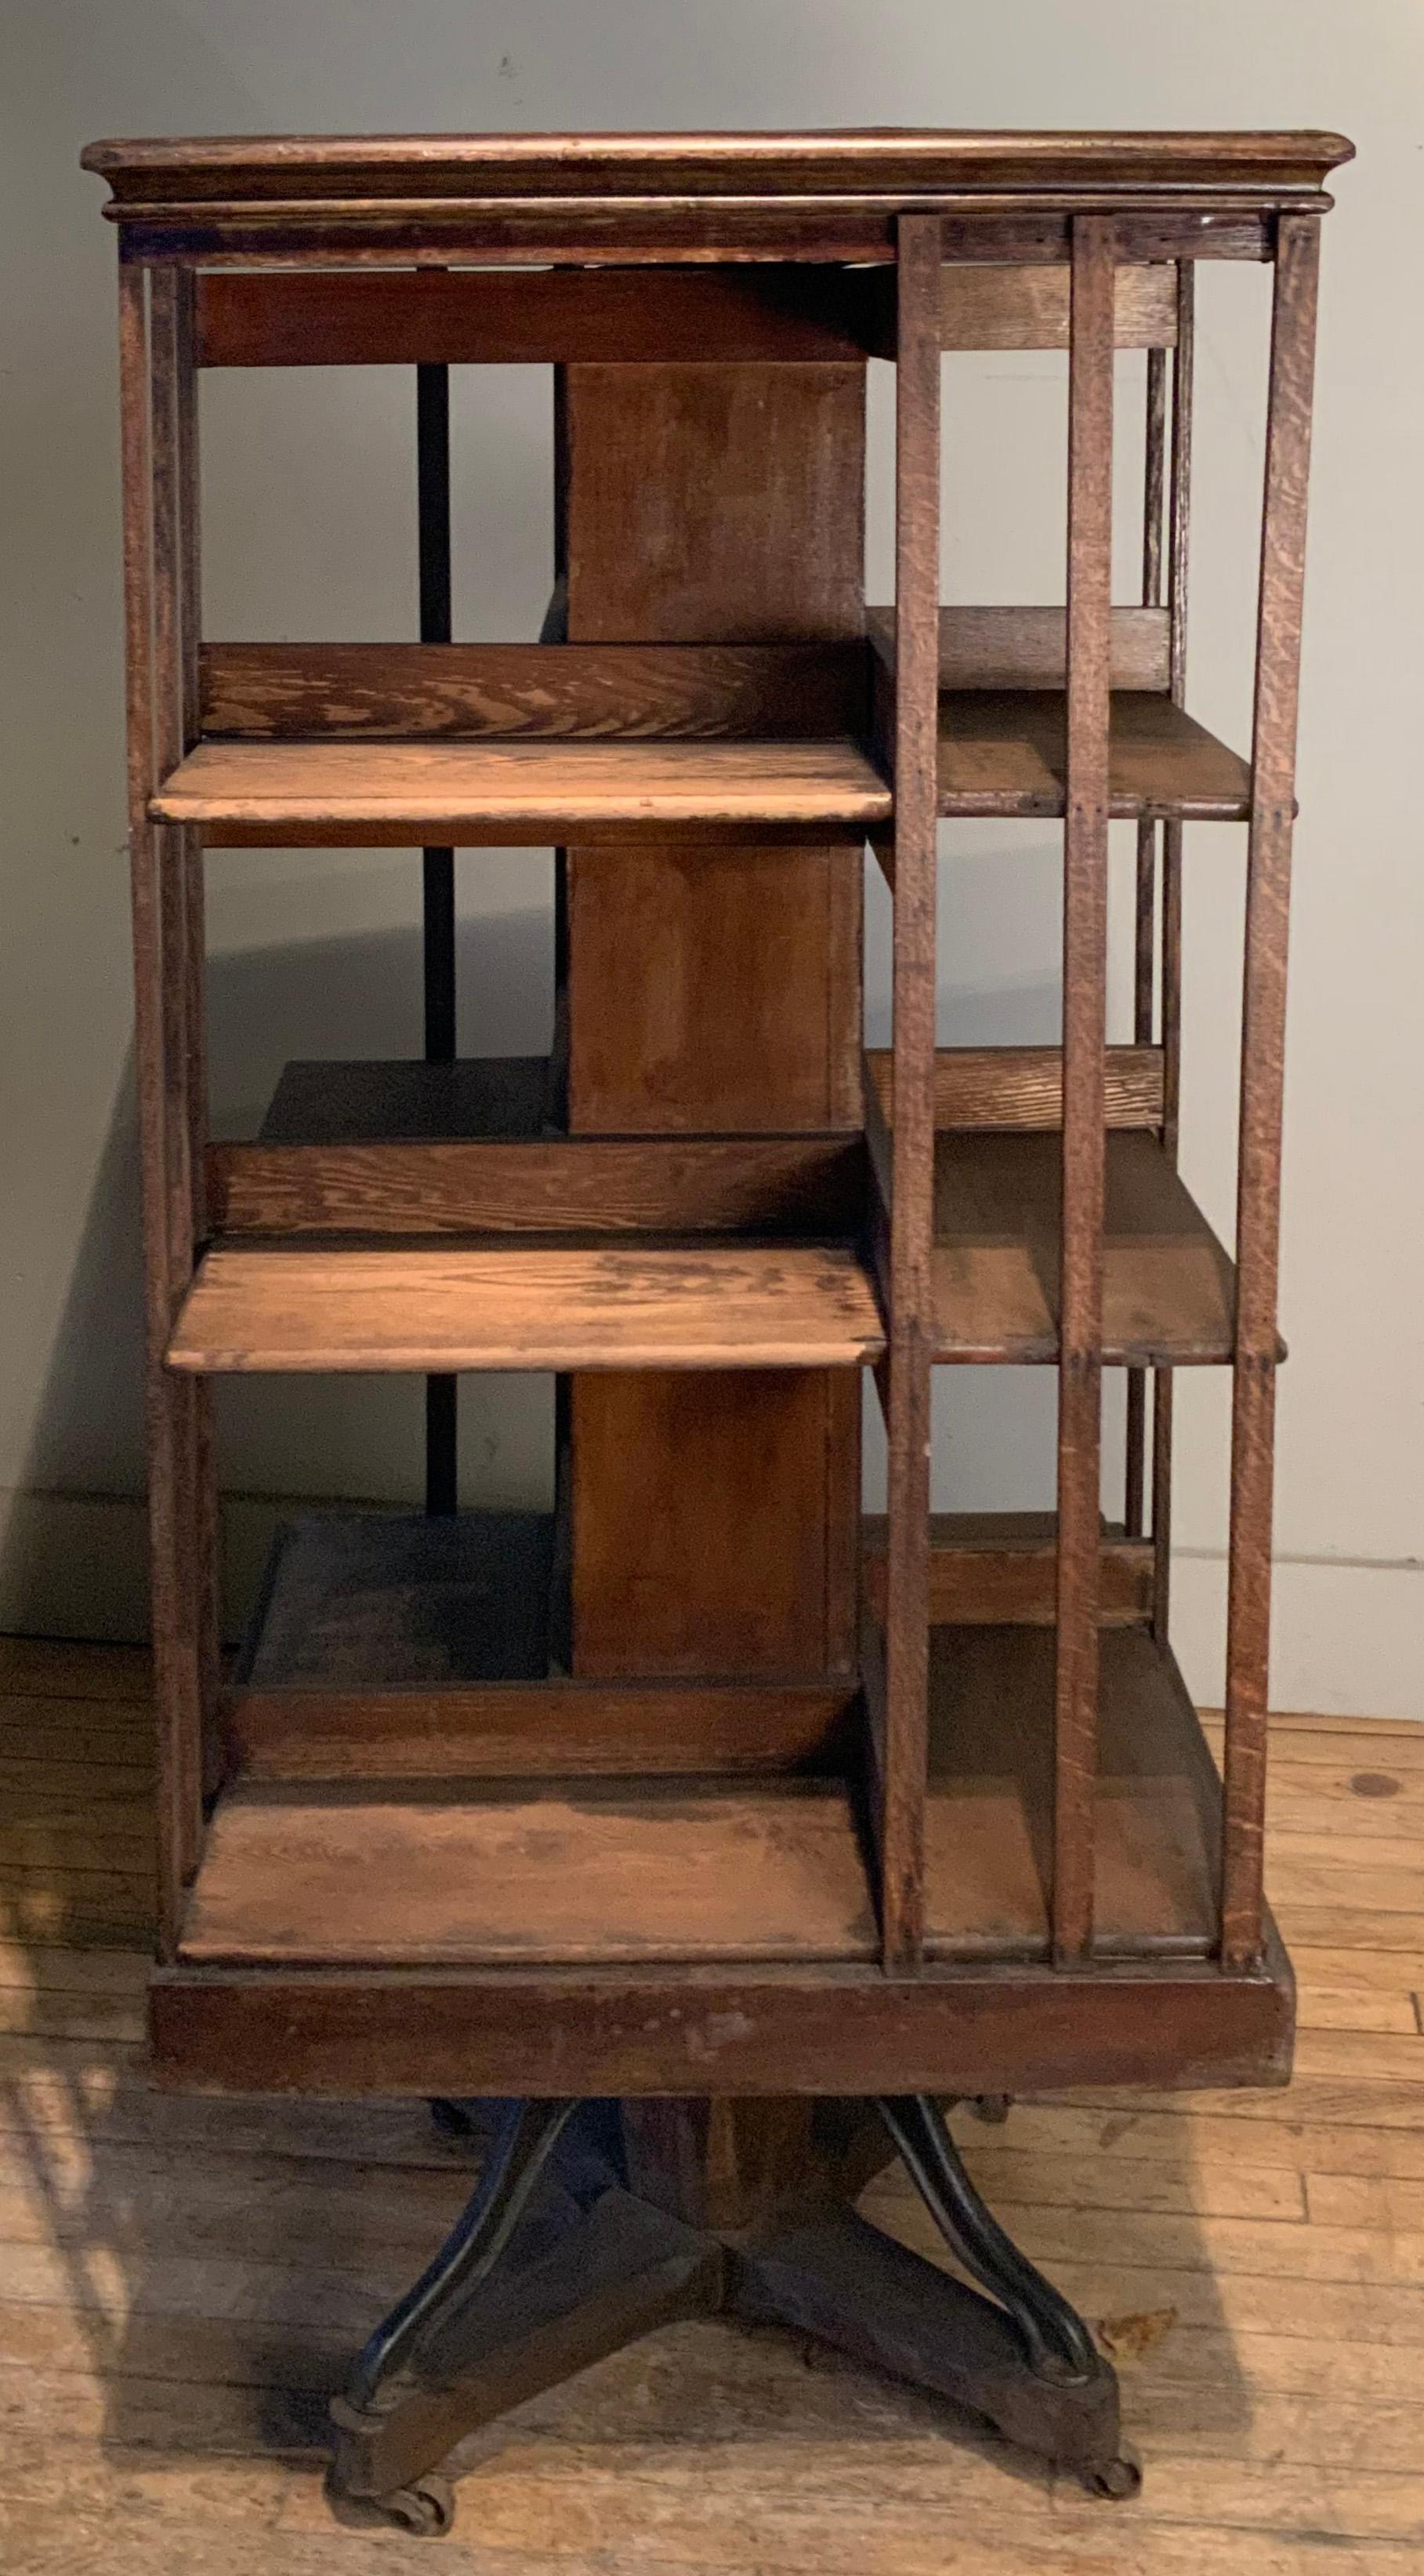 A wonderful and incredibly functional antique 1920's revolving bookcase. mounted on a base with cast iron mounts for extra support, it has four open sides with three shelves each. the whole piece turns easily on the center support. wonderful stylish